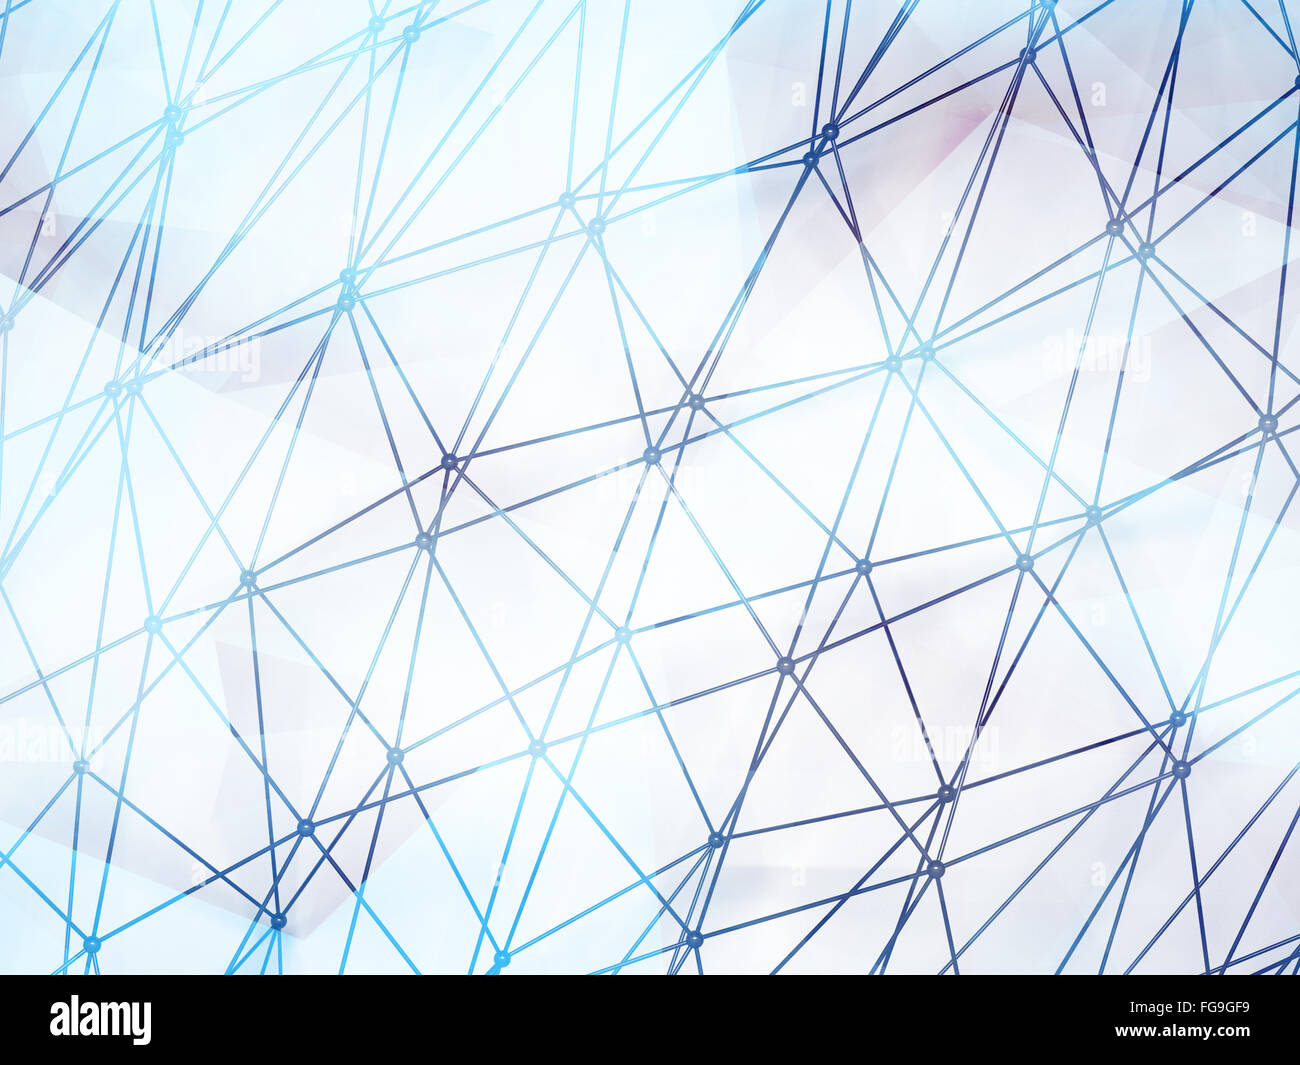 Abstract shining 3d digital molecular mesh structure over colorful polygonal background Stock Photo